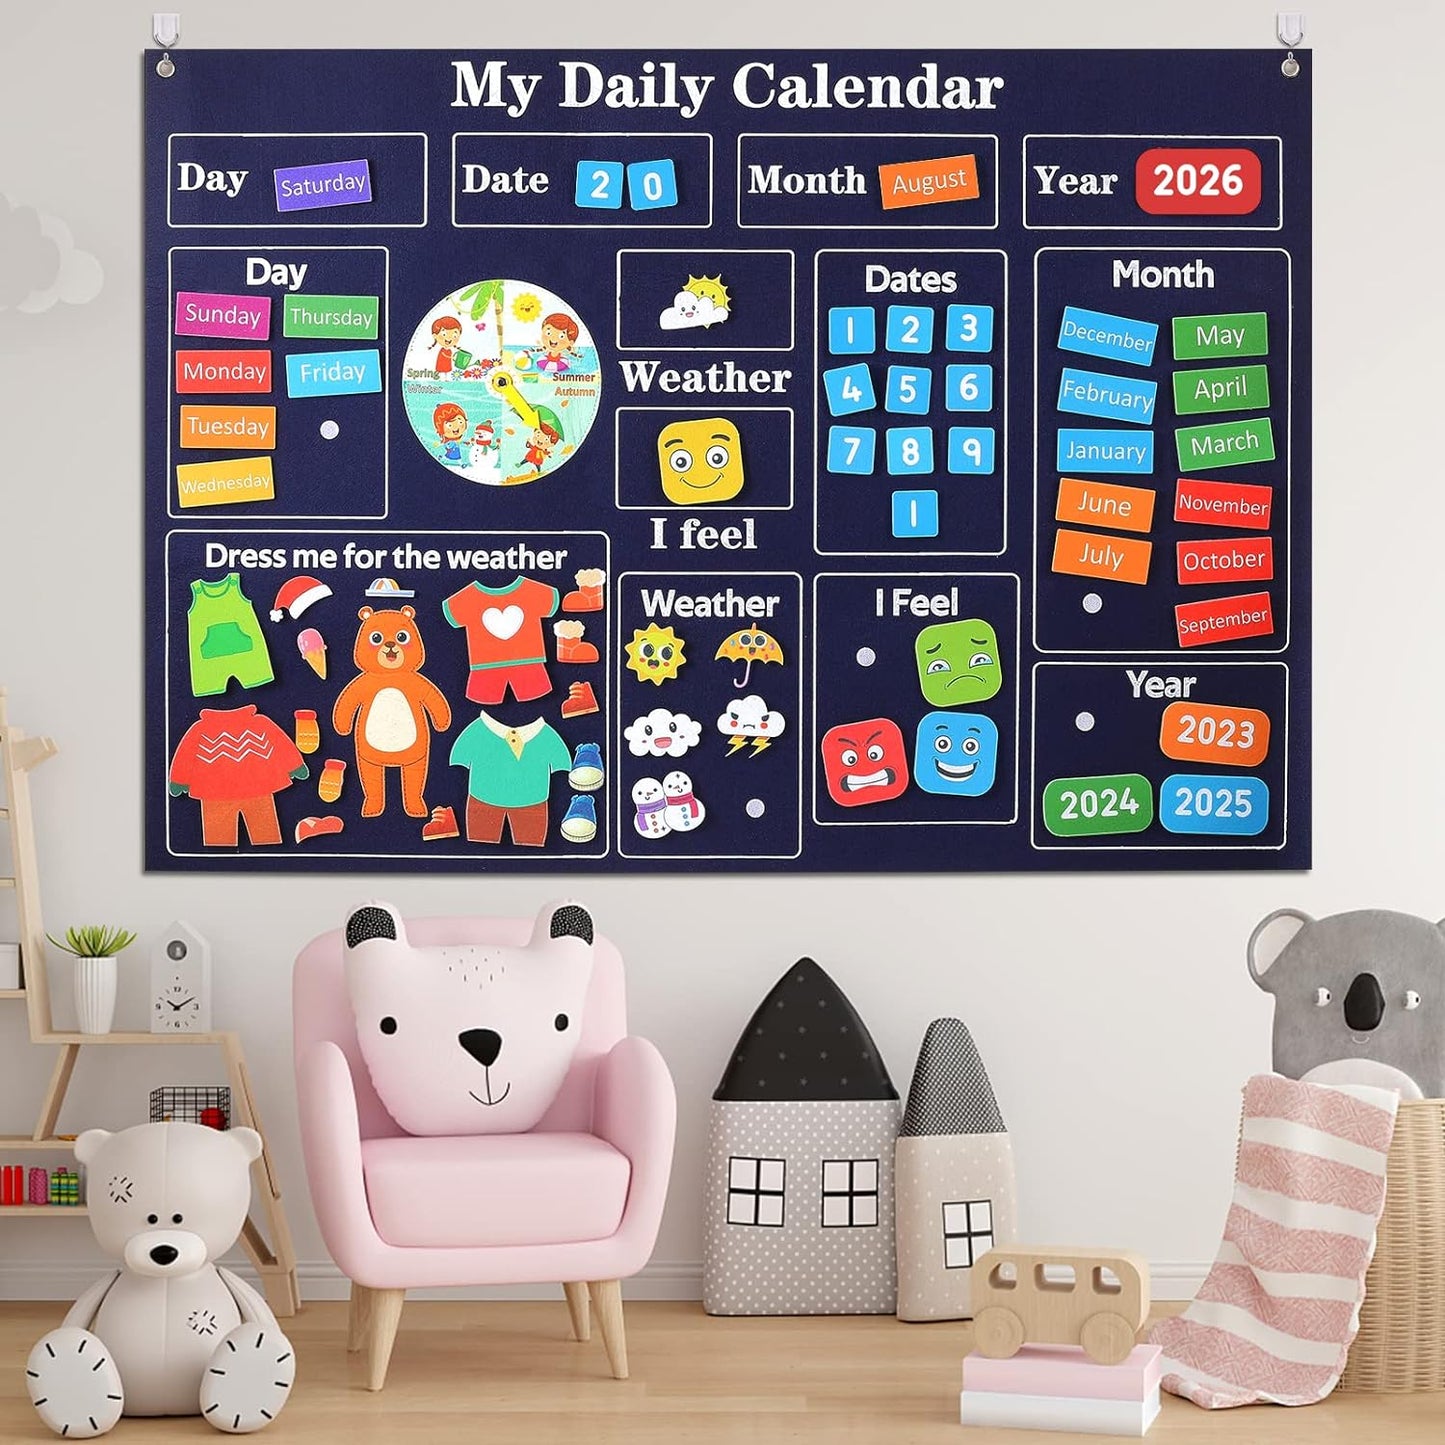 My First Daily Calendar-Preschool Classroom Must Haves, Circle Time Learning Center, Days of the Week Chart for Toddlers Learning, Classroom Calendar for Kids, 3.3Ft Felt Board for Toddlers